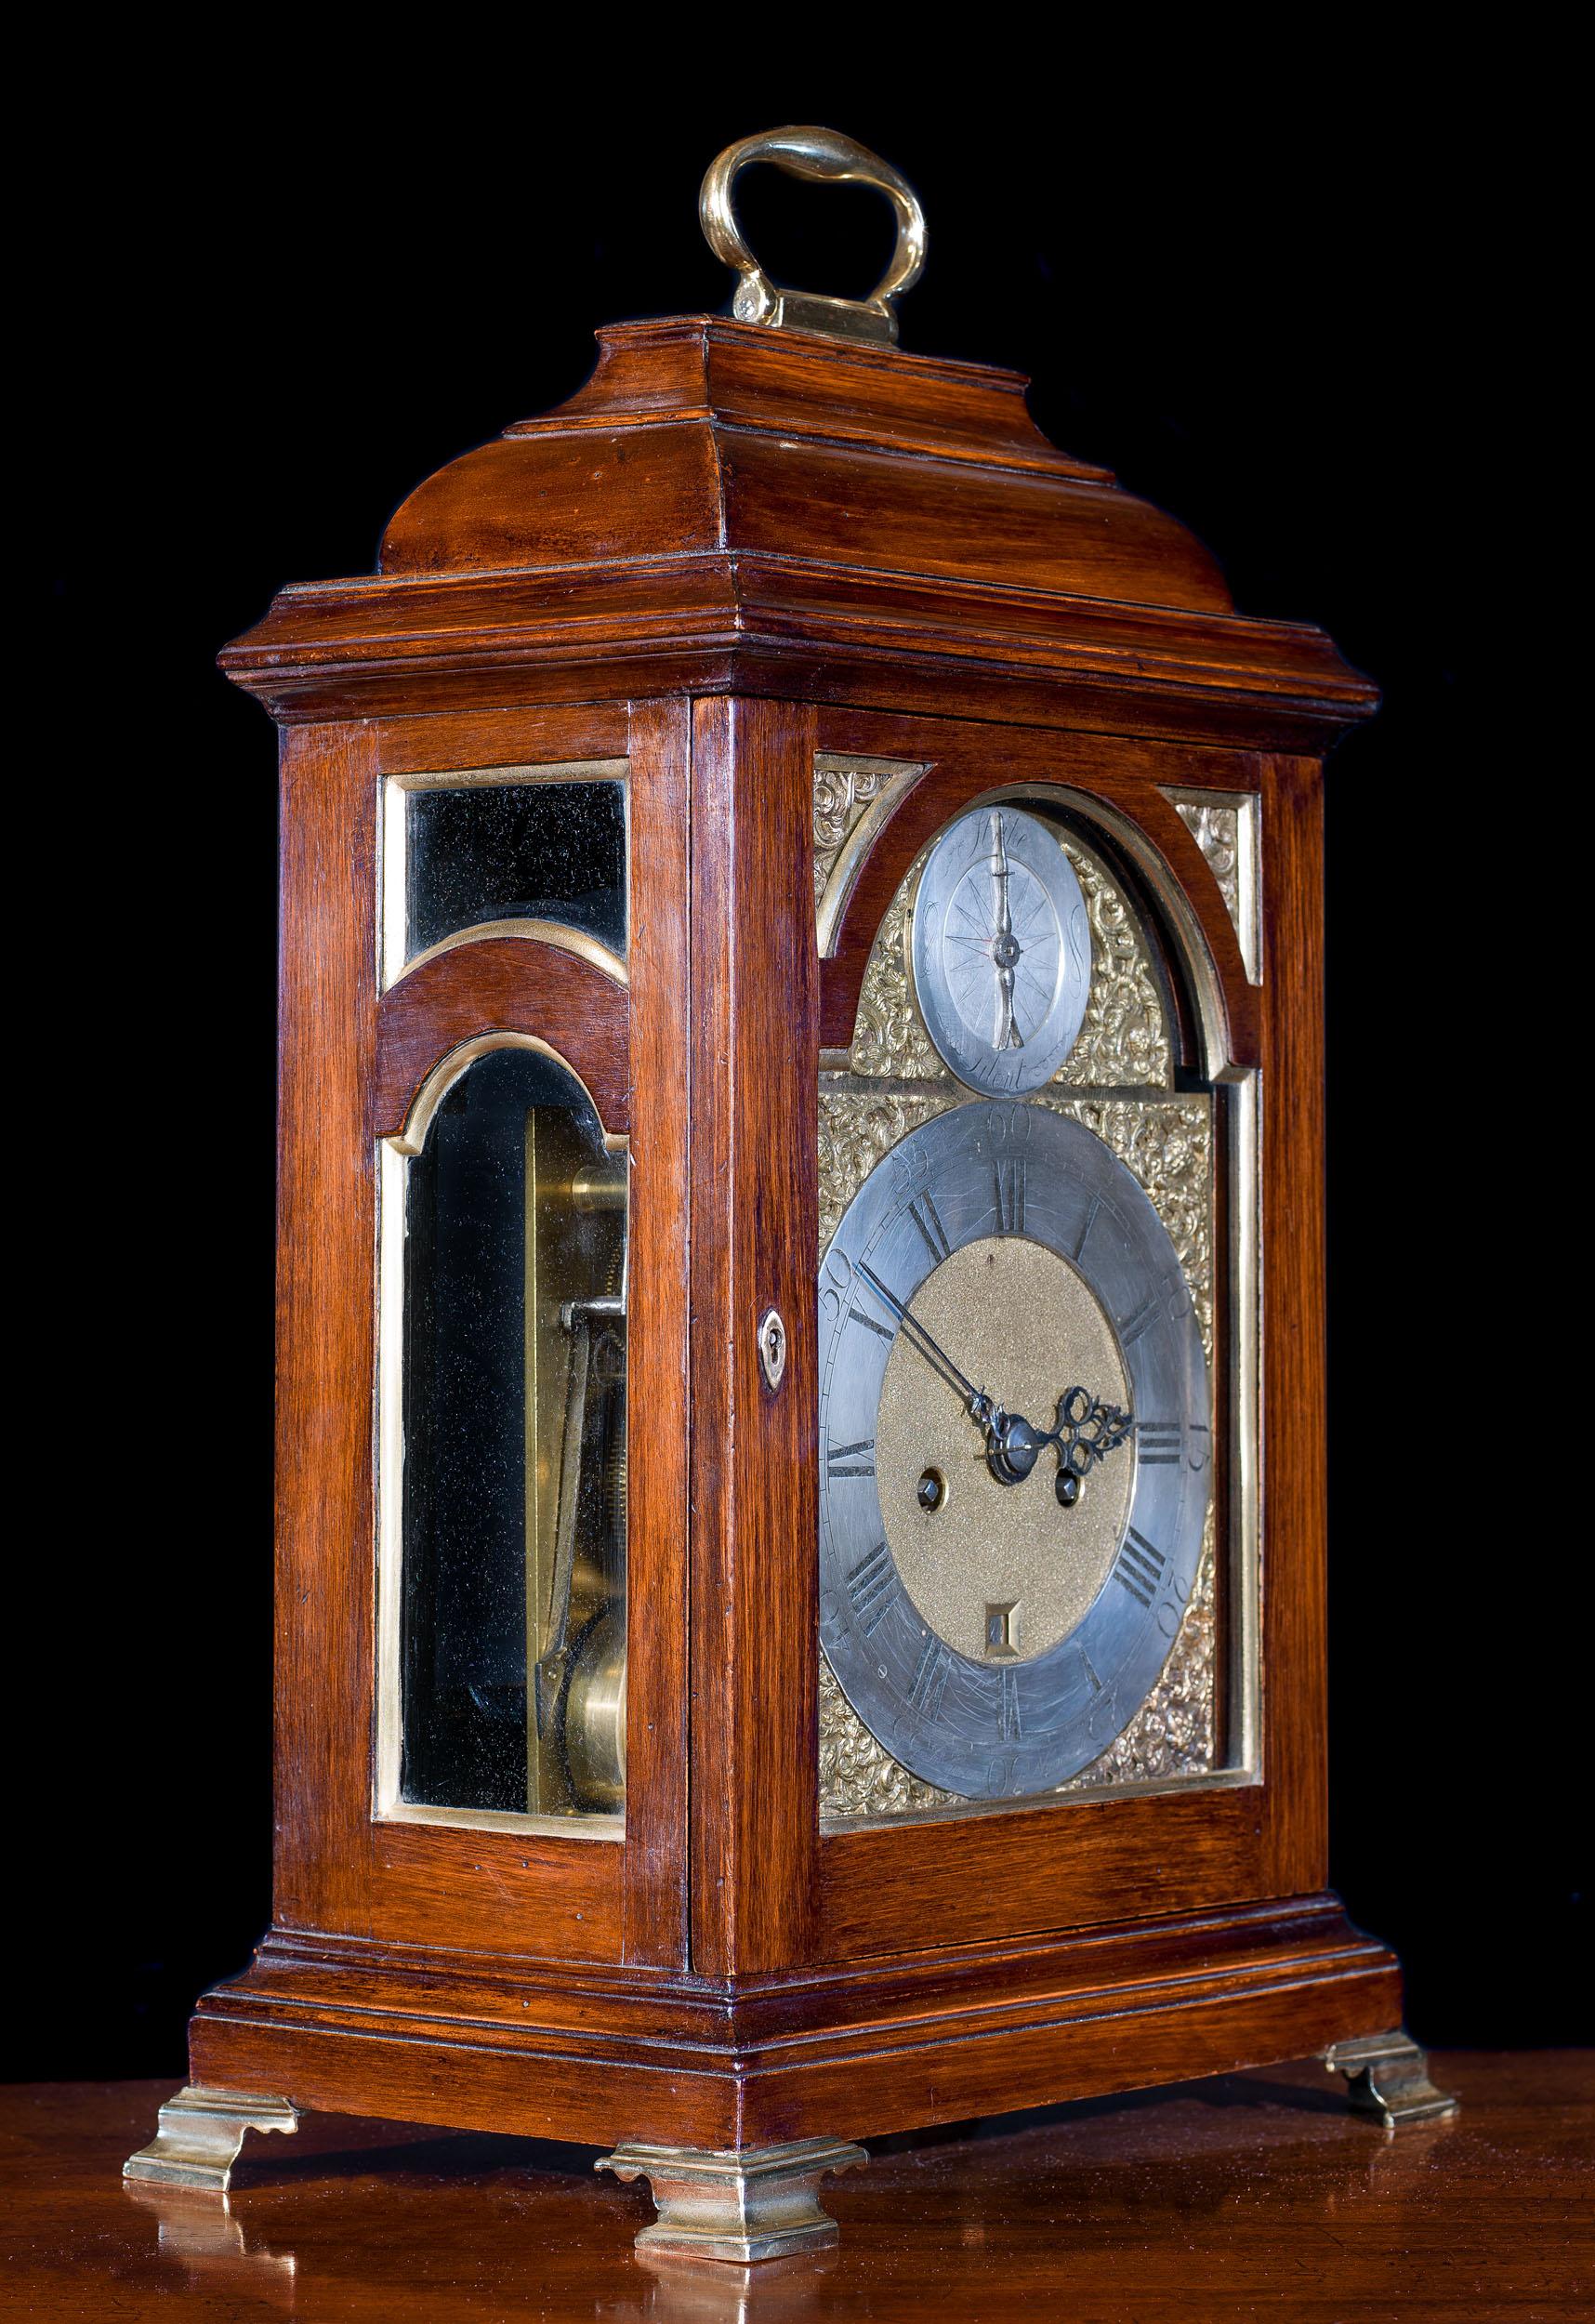 A fine Georgian walnut bracket clock by John Greaves of Newcastle (born c.1725 and active between 1745-94) with an eight day five pillar twin train fusee movement and anchor escapement. The clockface has a beautifully silvered chapter ring and